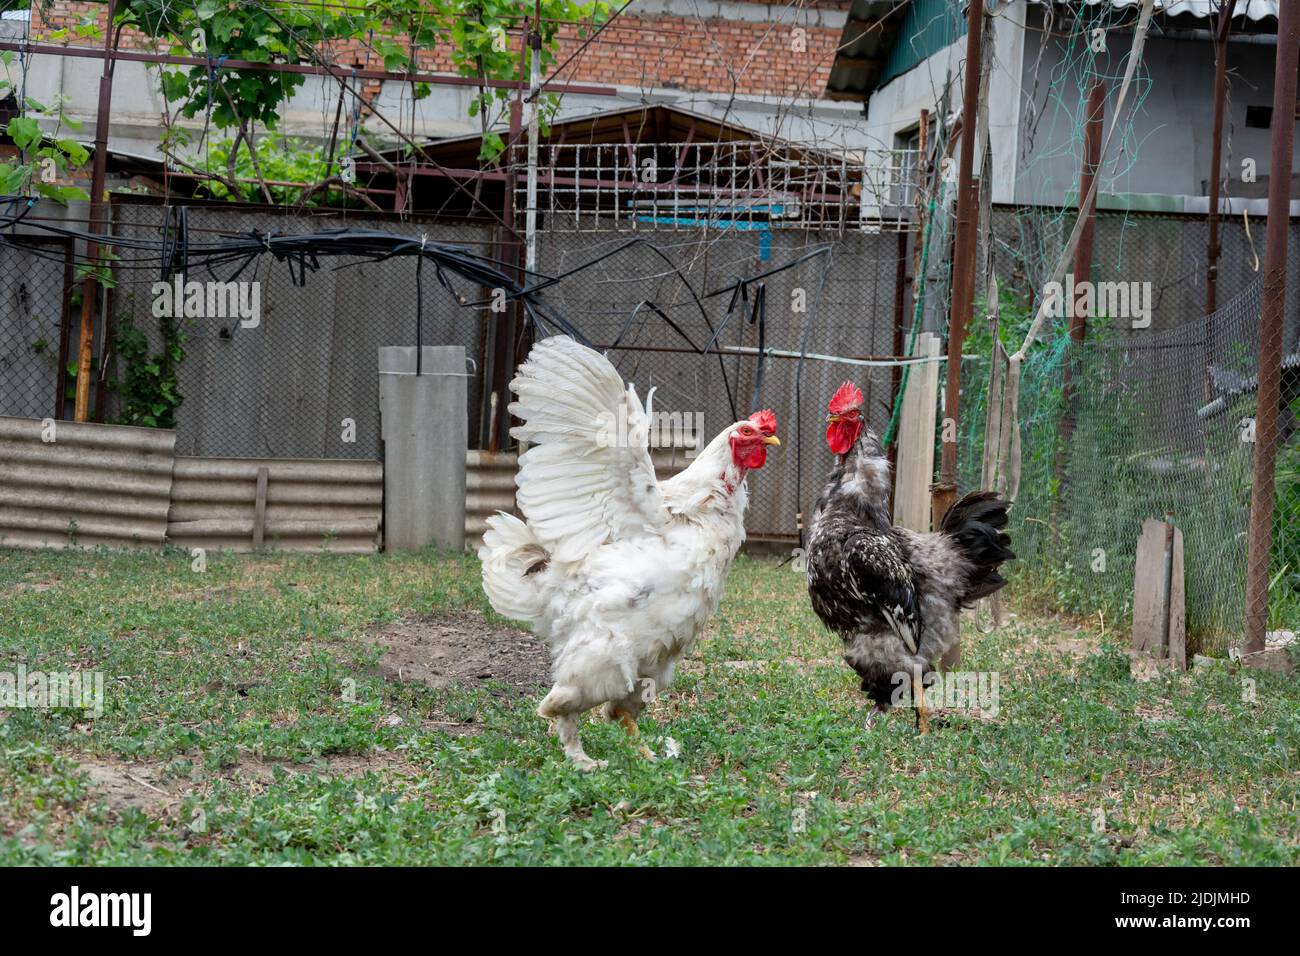 Rooster and young rooster free range. Selective Focus on black and white rooster. Young white rooster spread its wings demonstrating superiority Stock Photo